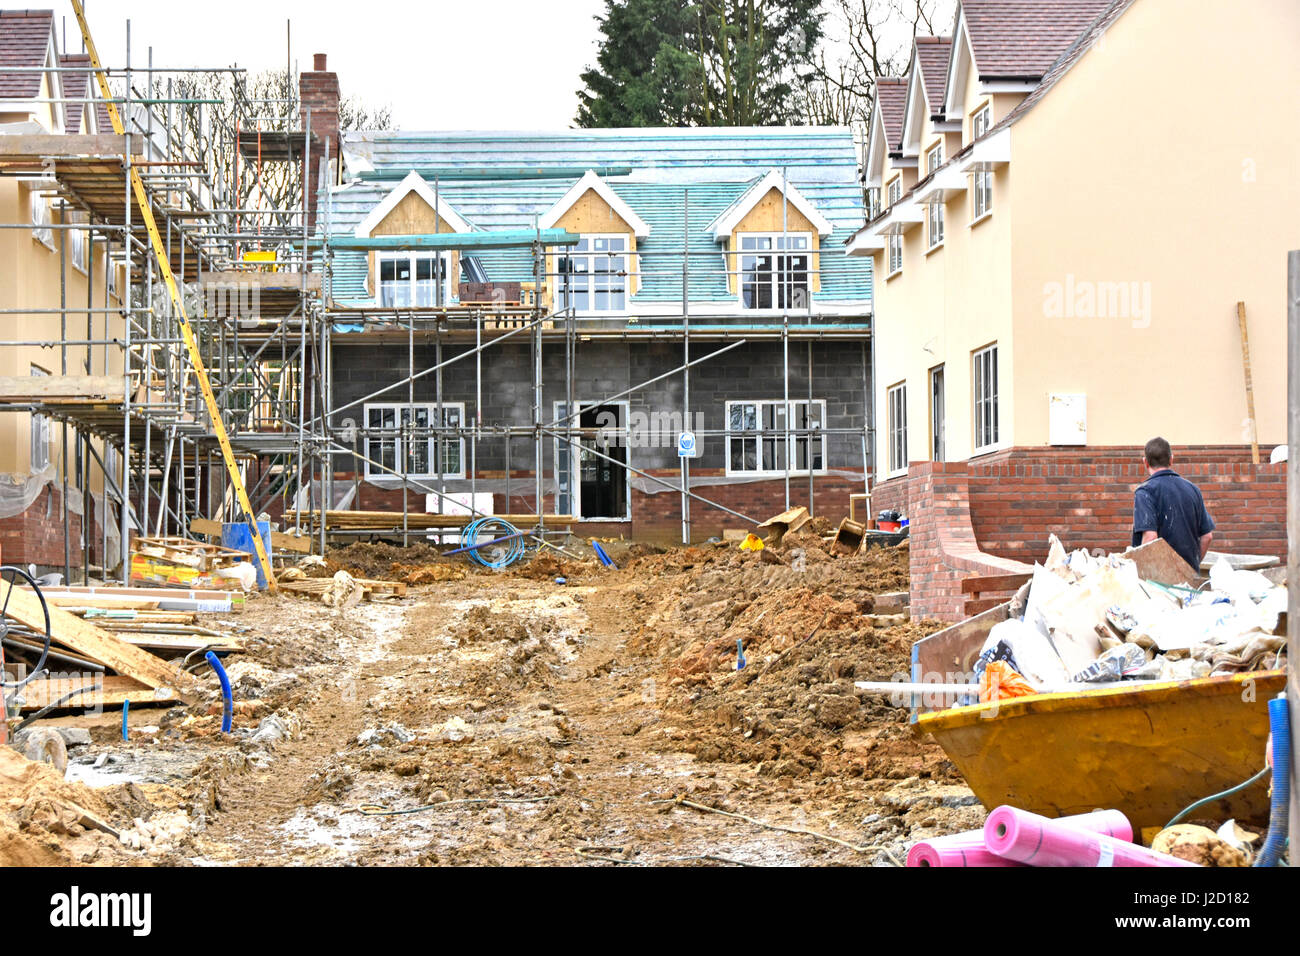 Mud clay winter building site small new uk housing property development site with one home painted scaffolding on two new houses roof on two homes Stock Photo